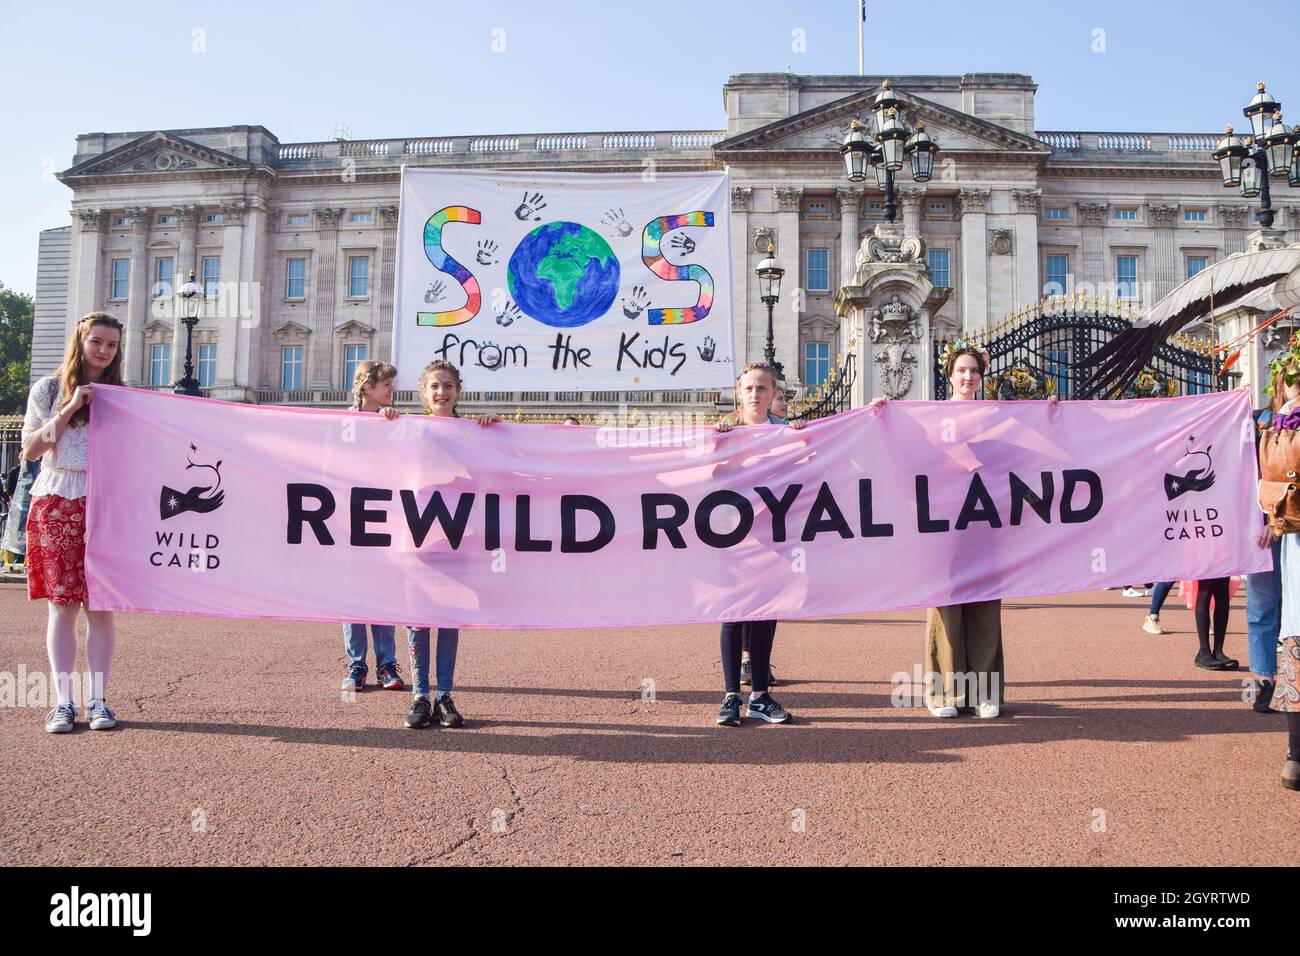 London, UK. 9th October 2021. Protesters, children, and families gathered outside Buckingham Palace and delivered a petition asking the royal family to rewild their land to increase wildlife and help fight the climate crisis. Credit: Vuk Valcic / Alamy Live News Stock Photo